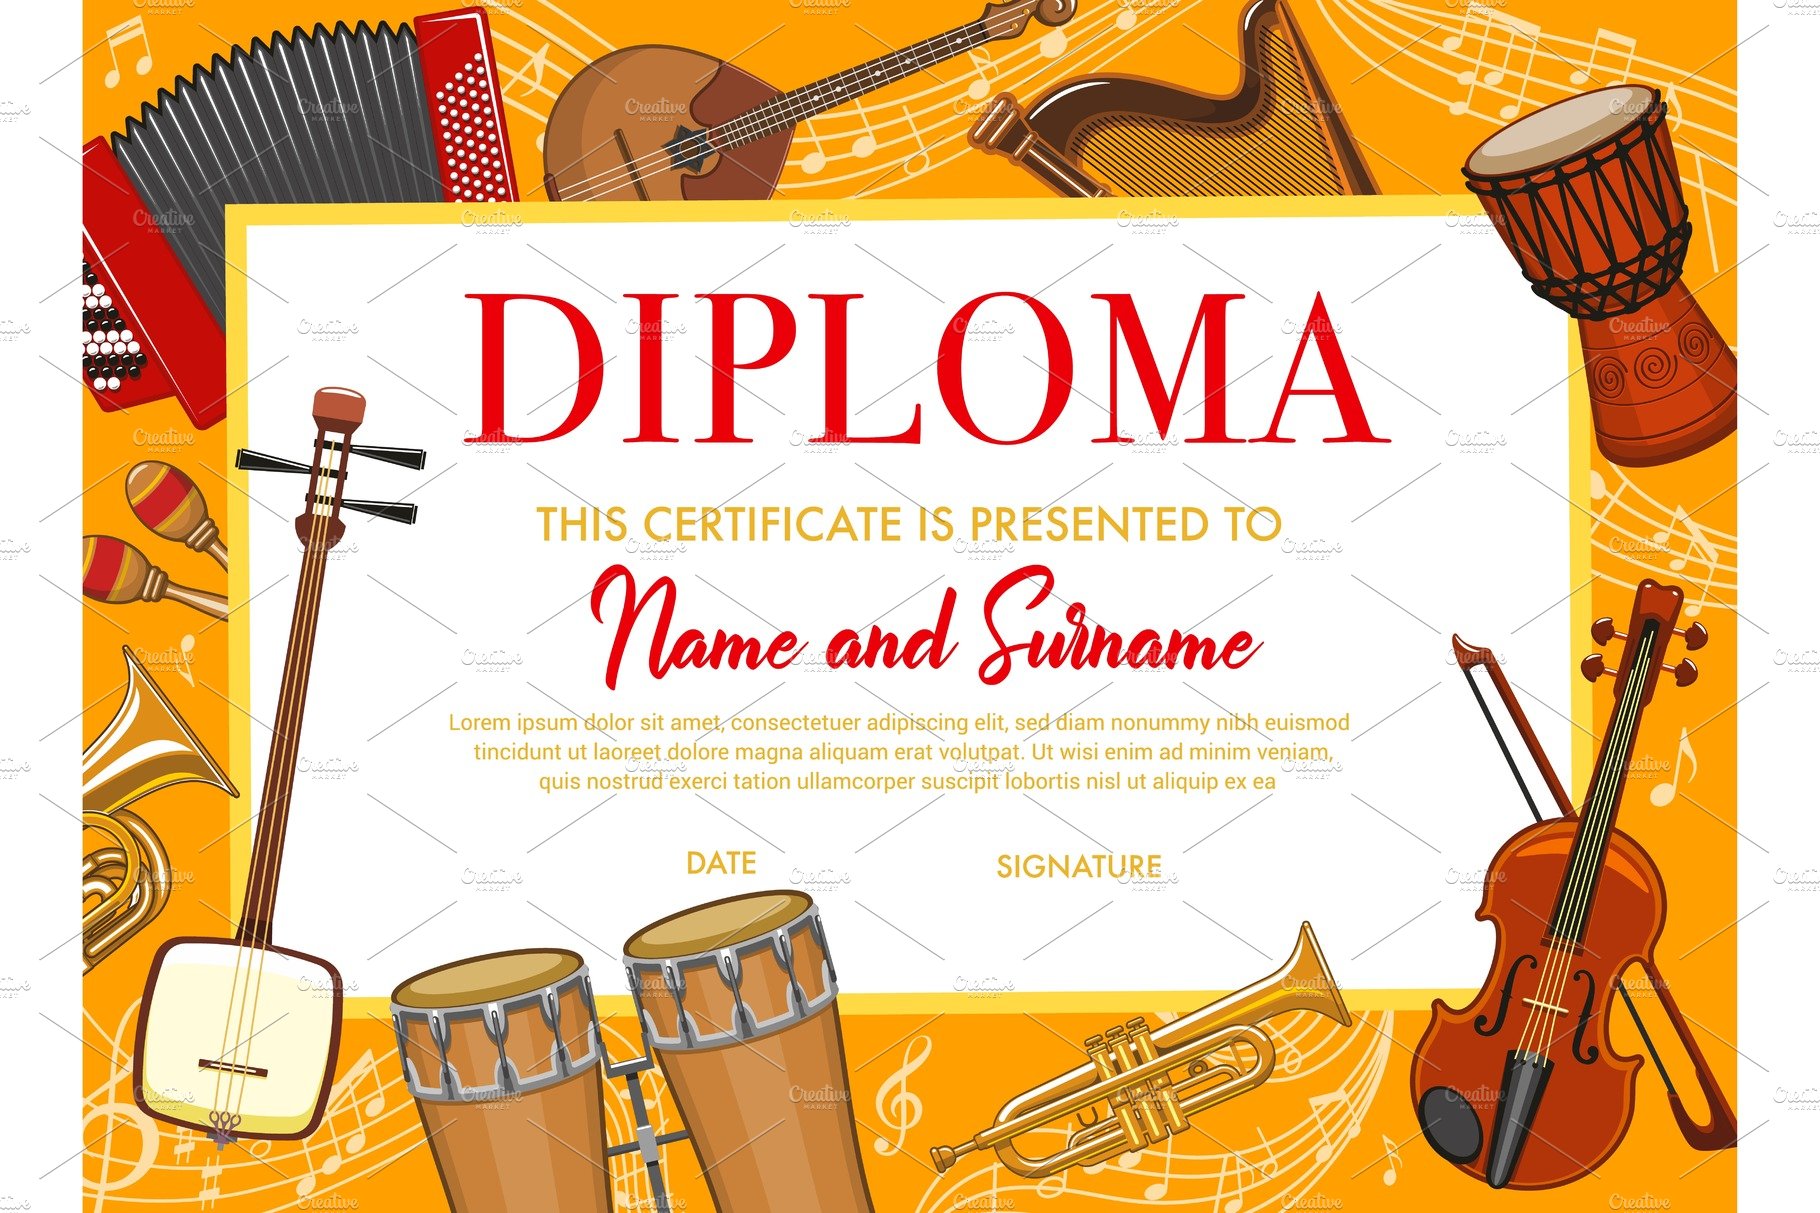 Education diploma with instruments cover image.